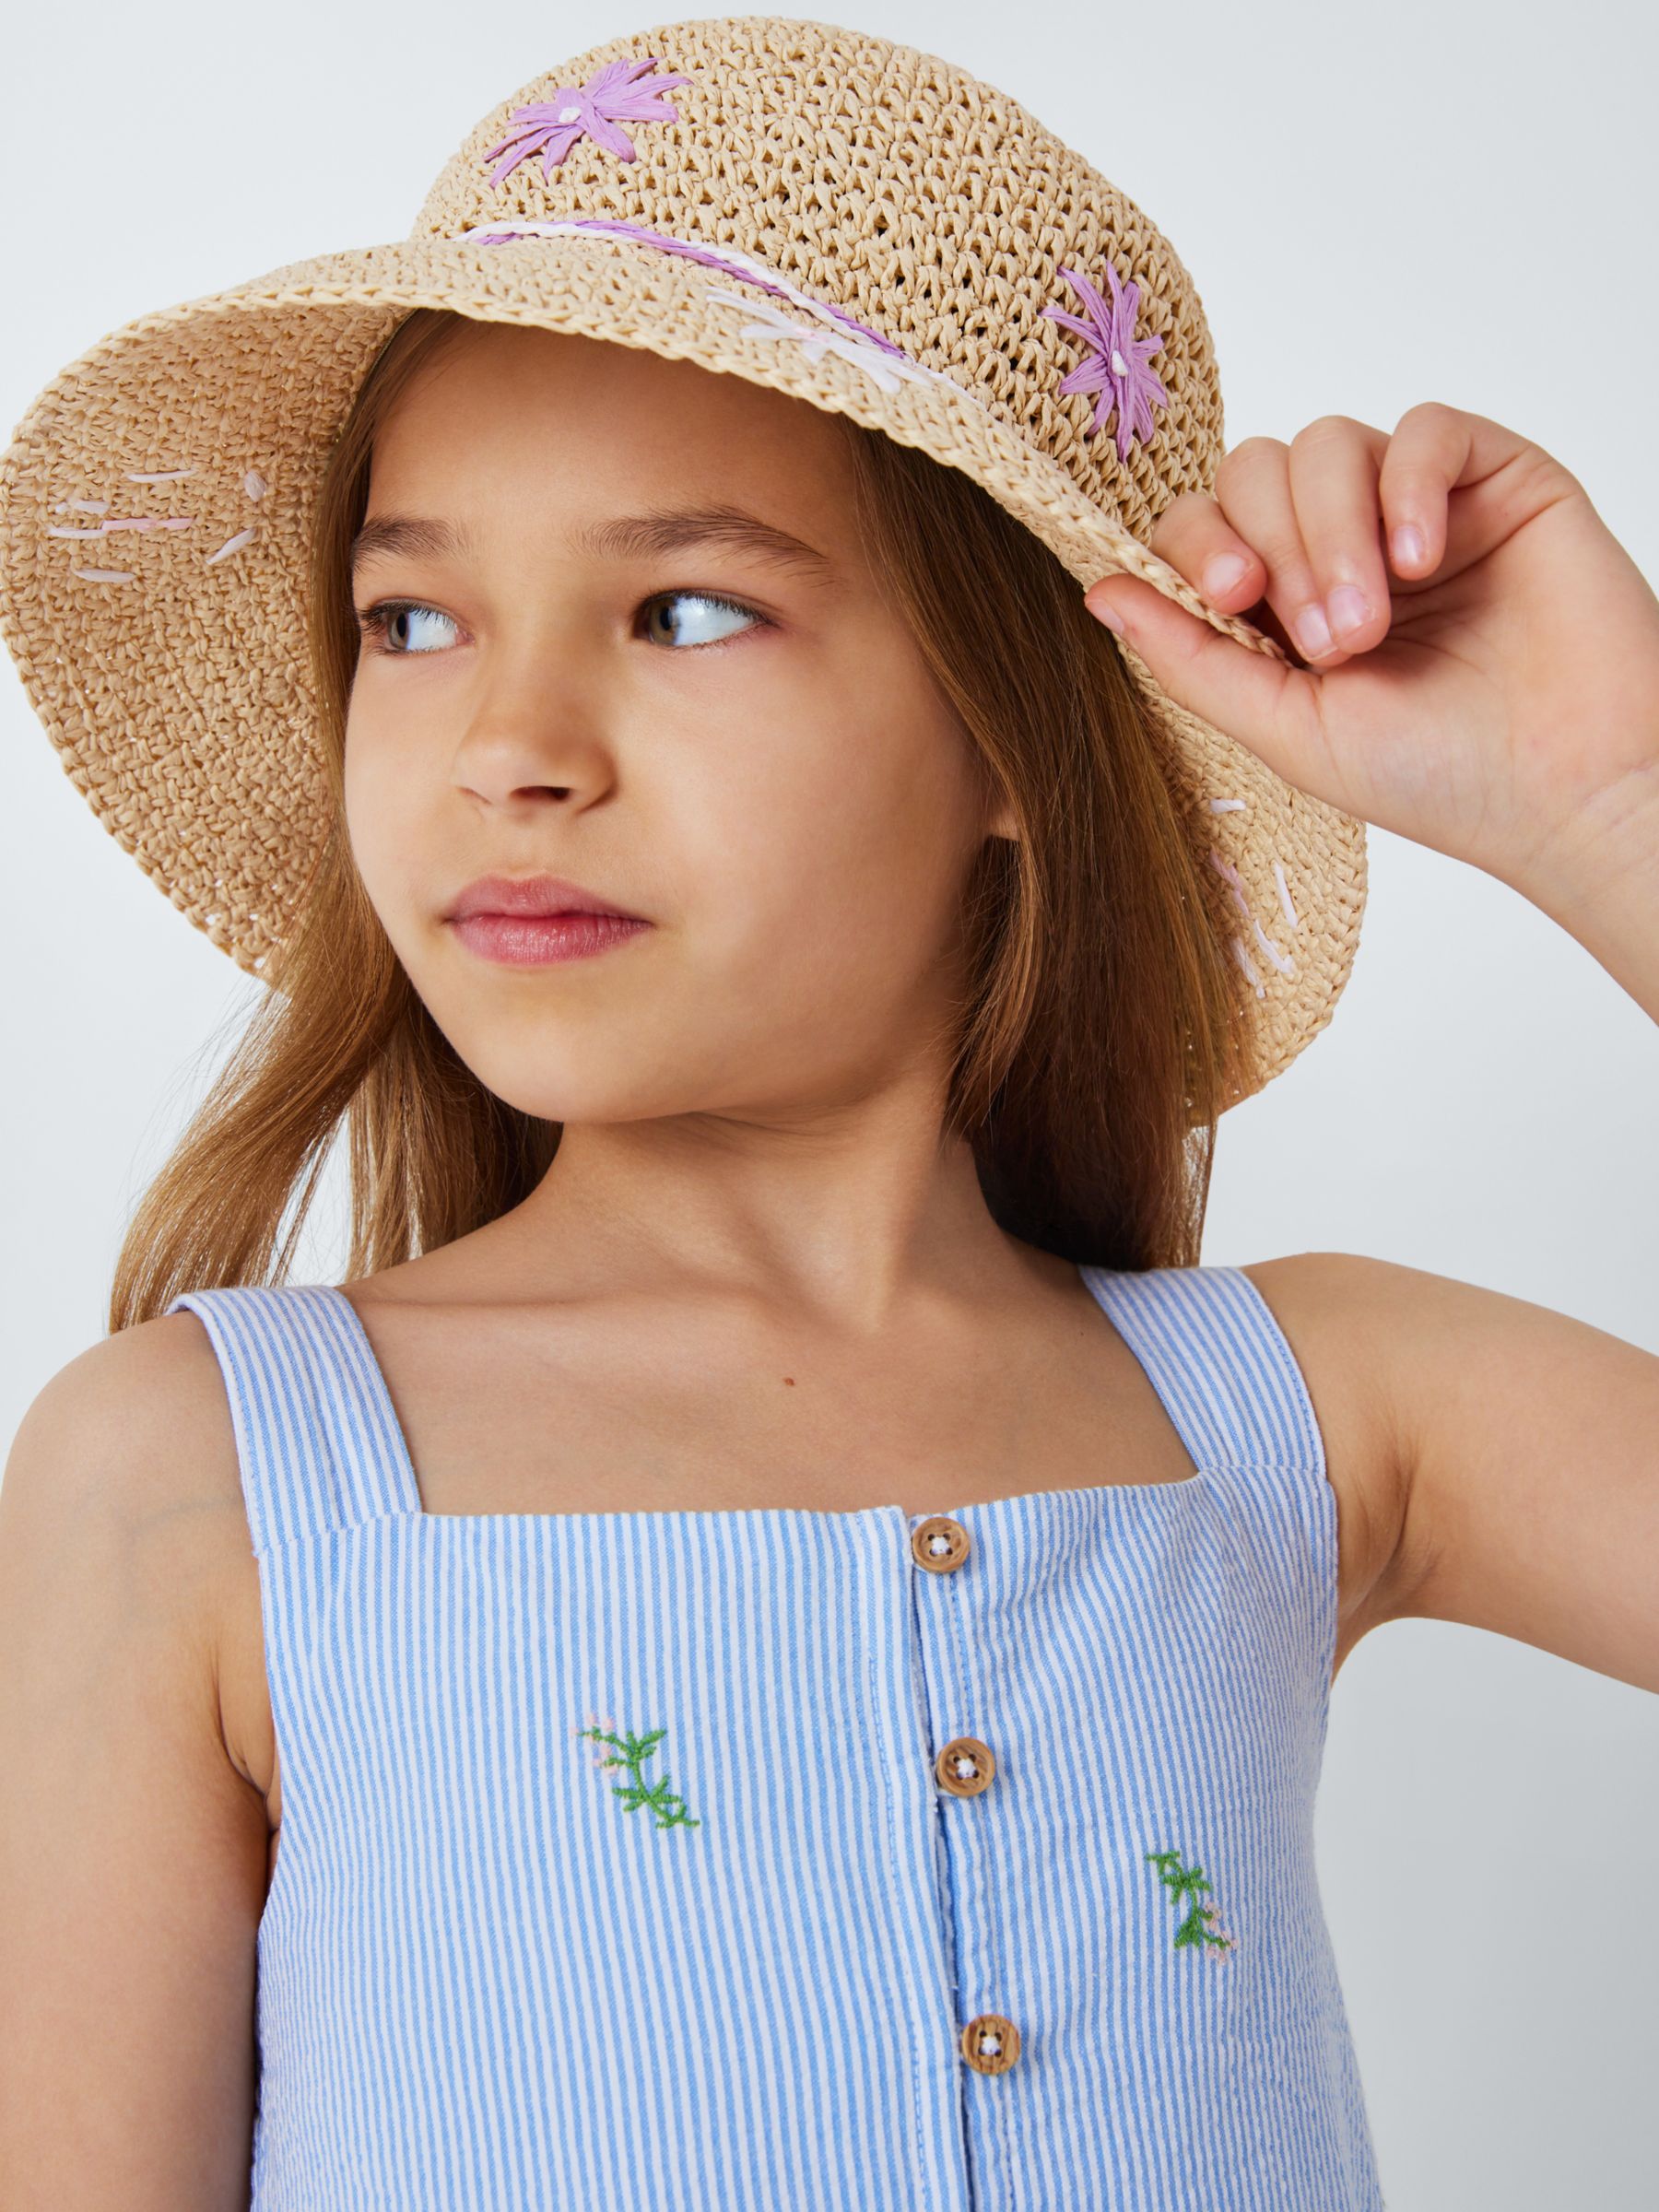 Buy John Lewis Kids' Pinstripe Embroided Tiered Dress, Blue/White Online at johnlewis.com